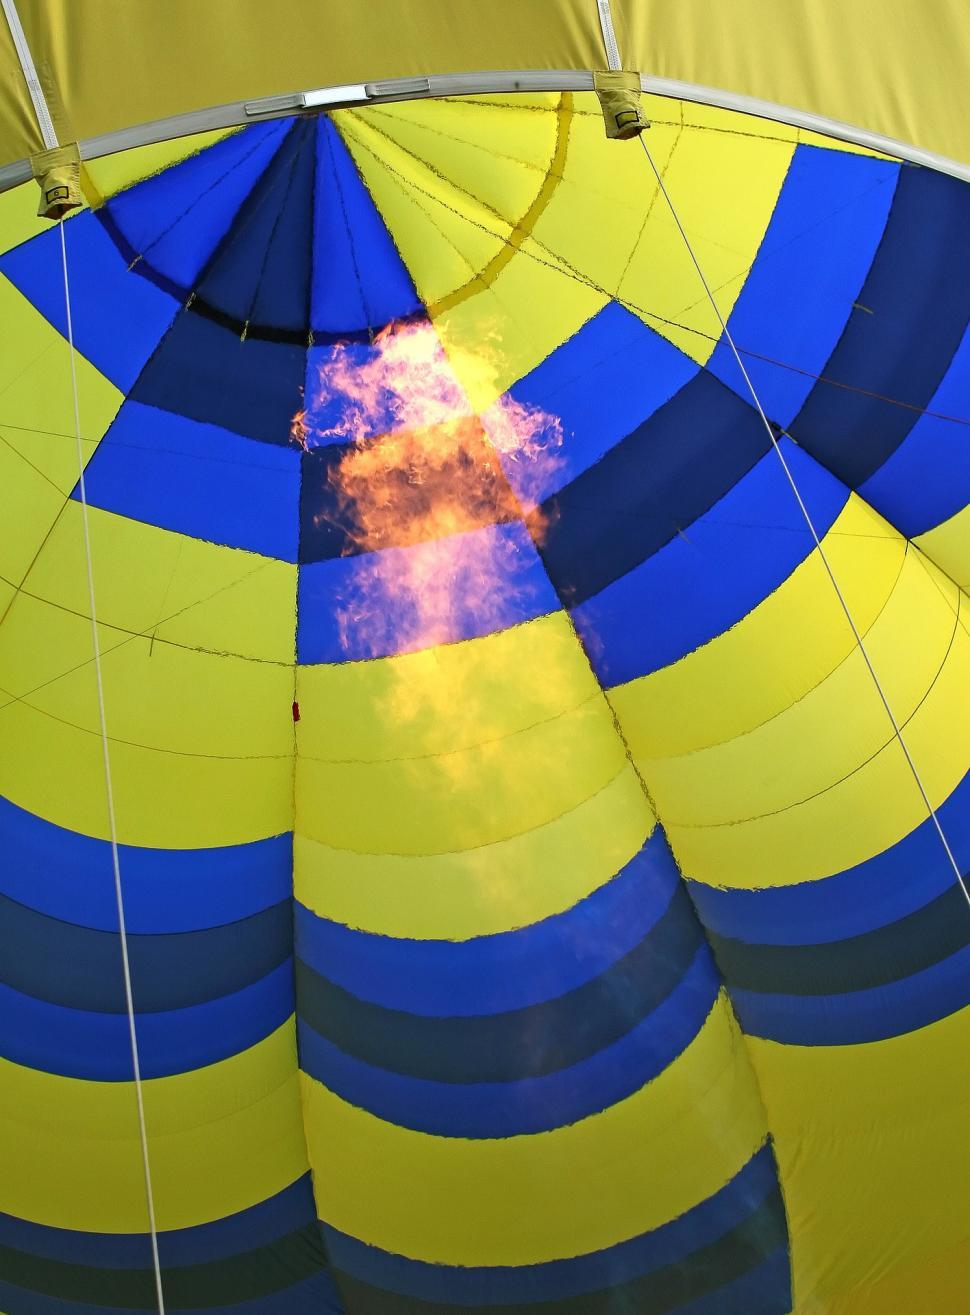 Free Image of Large Blue and Yellow Hot Air Balloon 